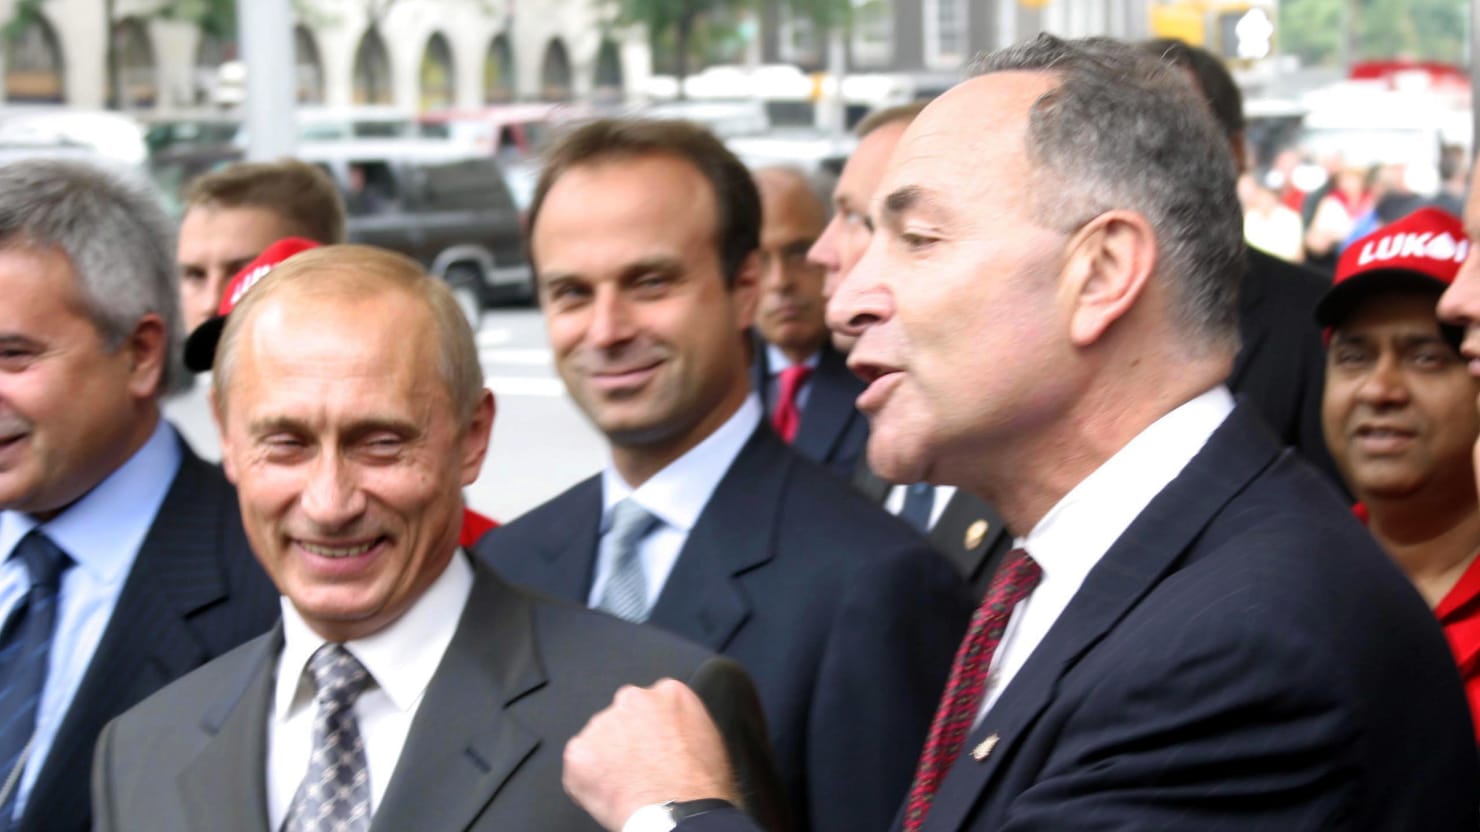 Schumer claims Trump is too cozy with Putin - Stormfront